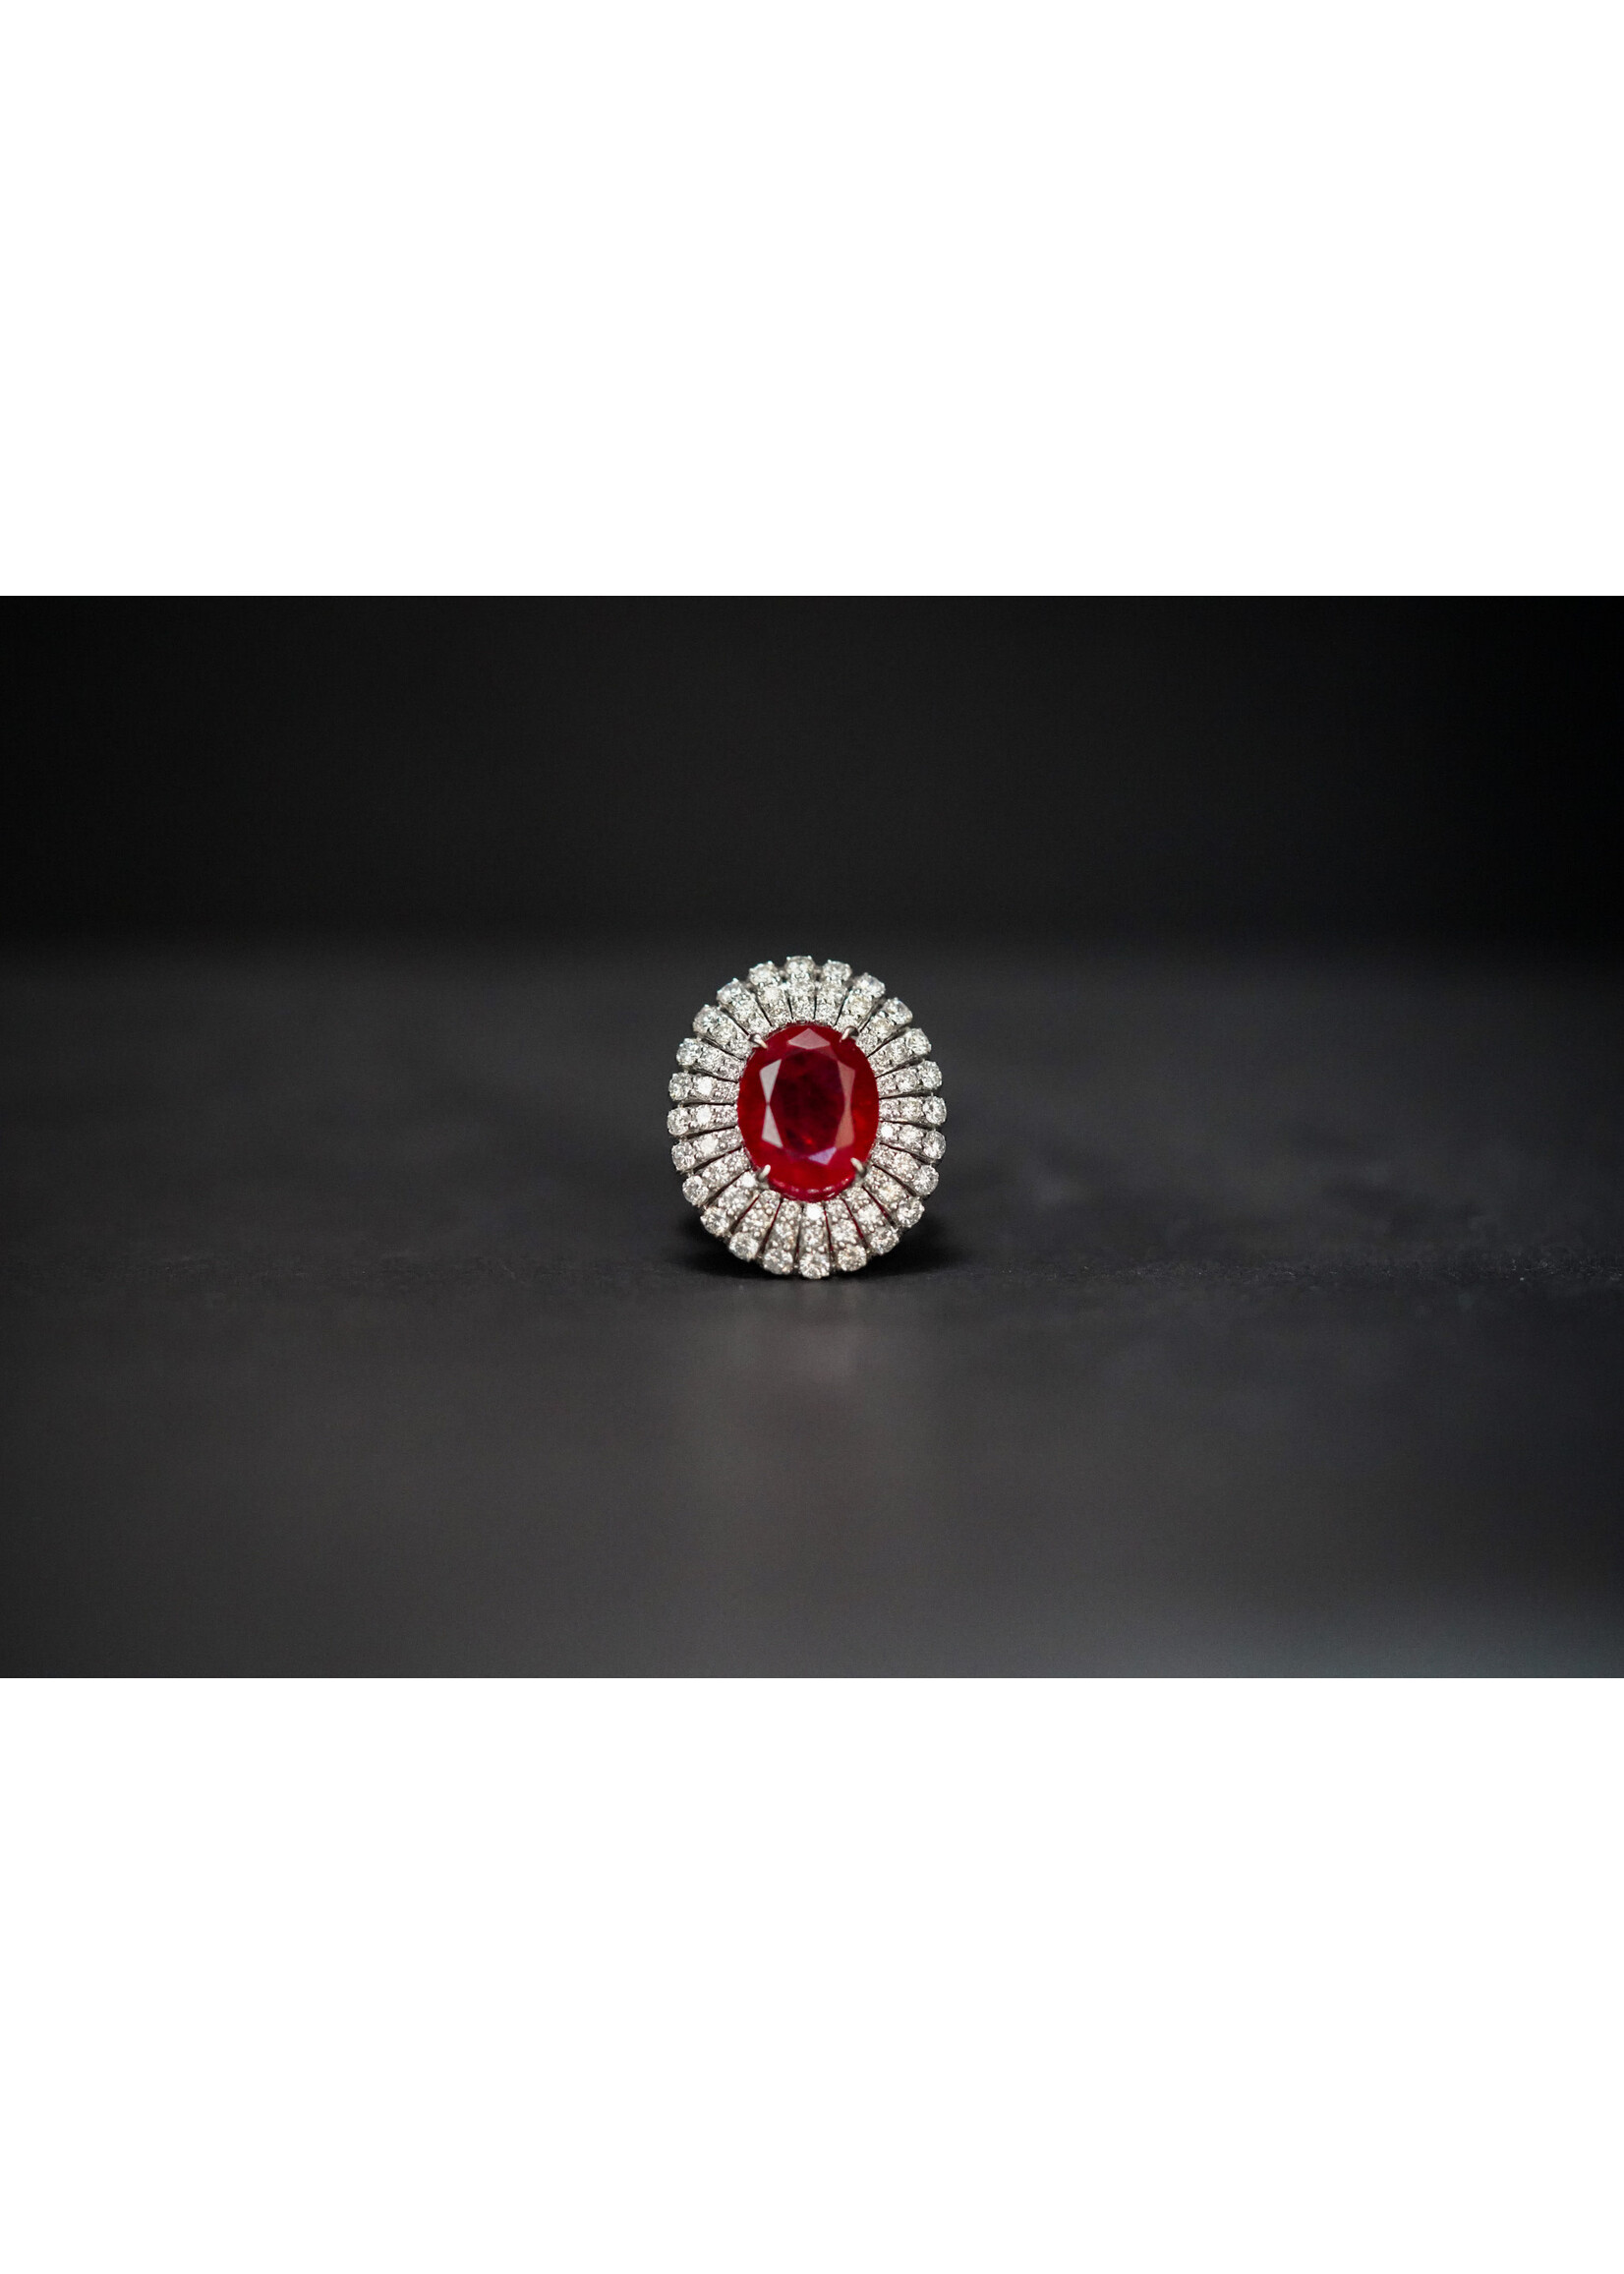 14KW 11.7g 12.81ctw (10.69ctr) Glass Filled Ruby & Diamond Fashion Ring (size 6.5)